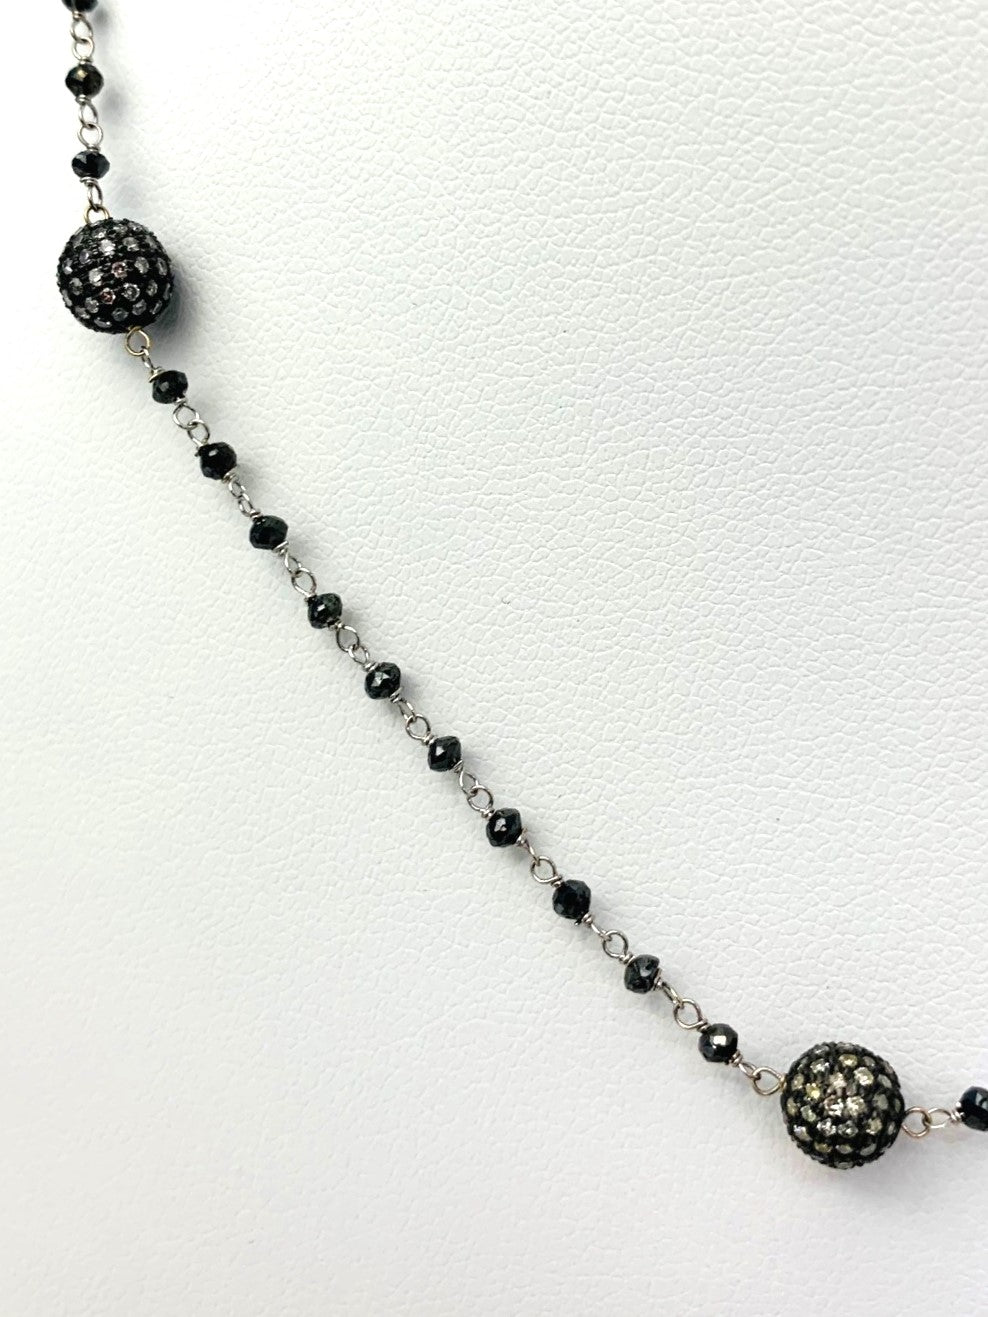 18" Black Diamond Rosary Necklace With Blackened Sterling Silver Pave Diamond Beads in 14KW, SS - NCK-385-DCOROSDIA14WSS-BLKGRY-18 10.6ctw